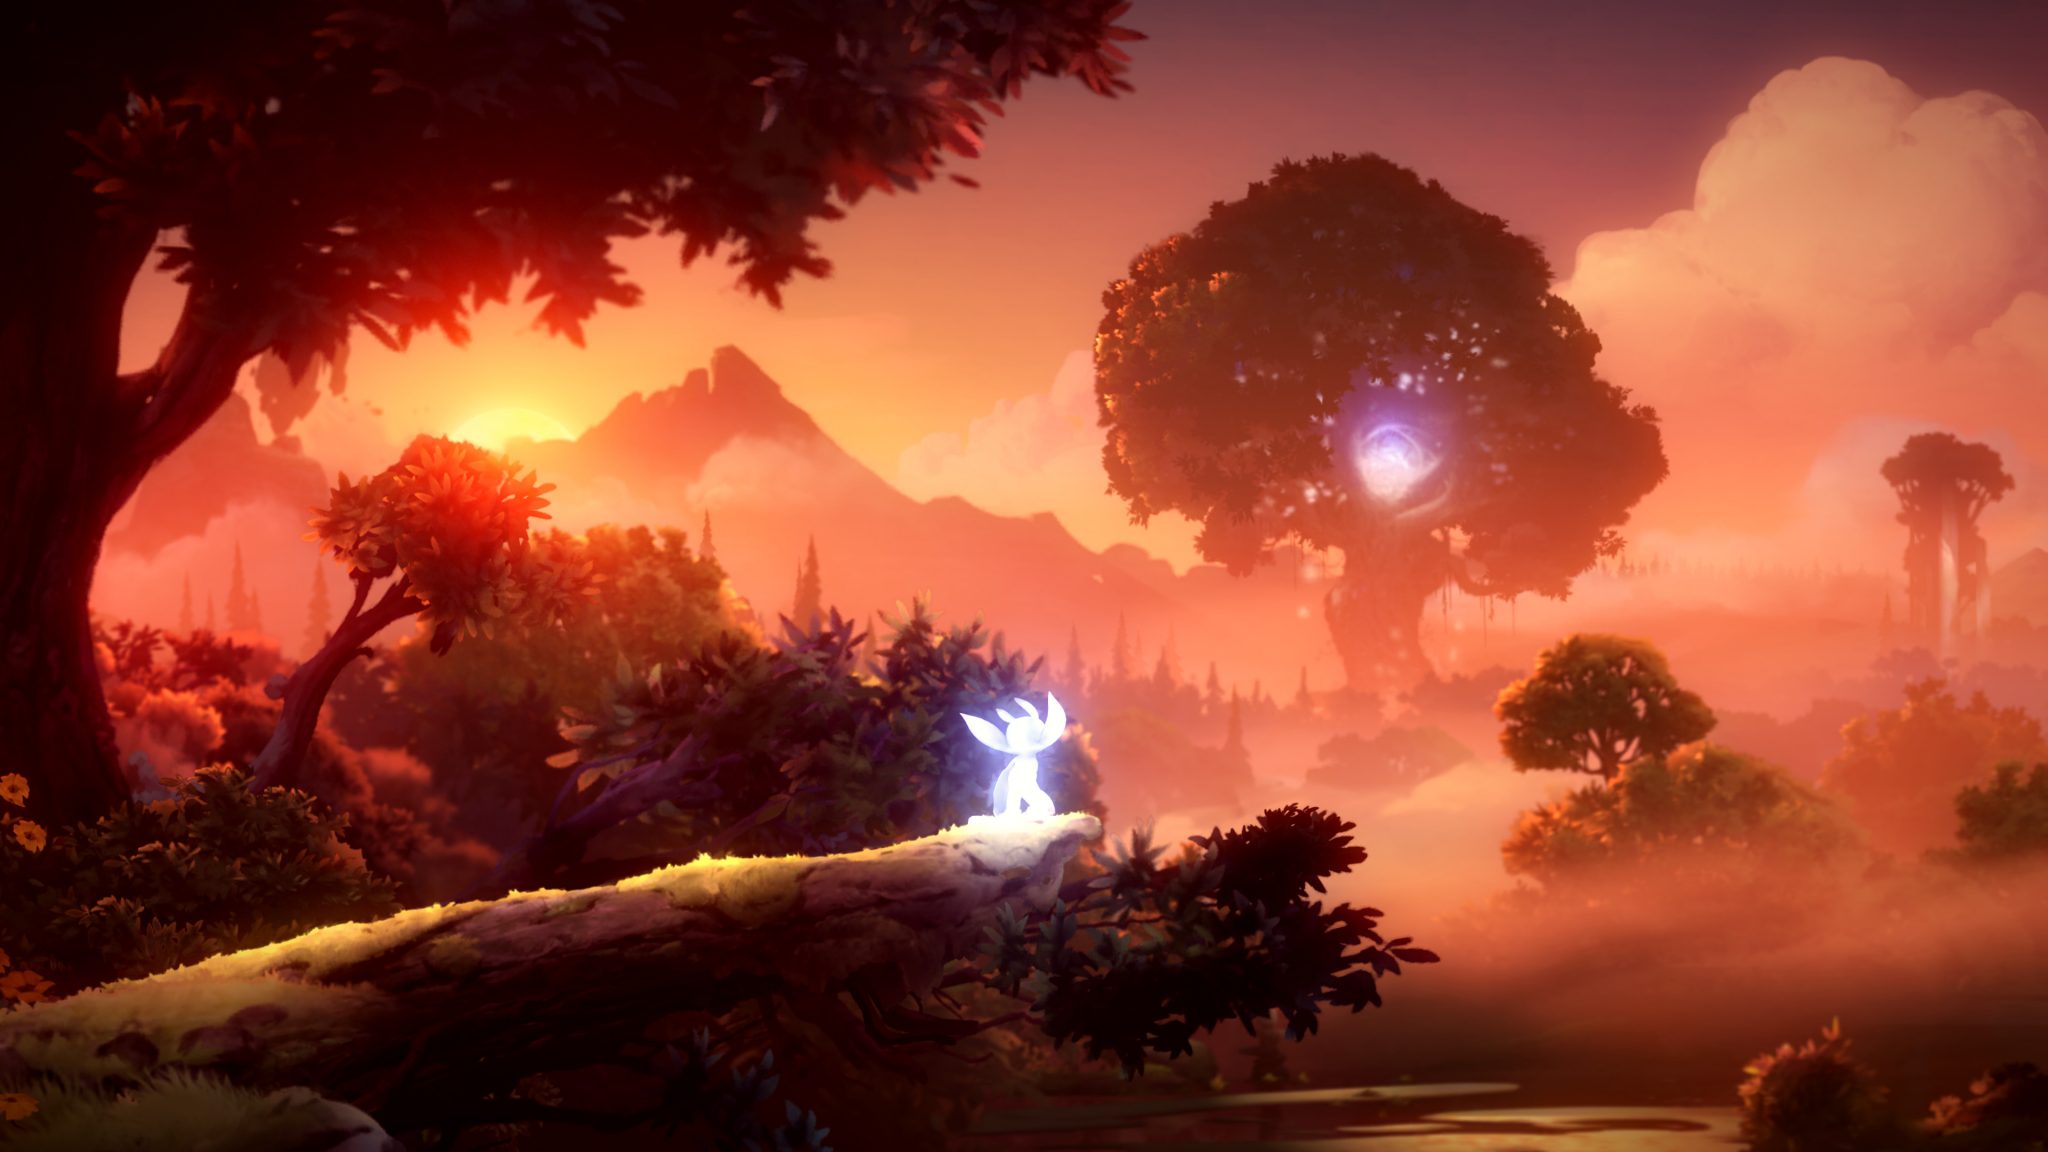 ori and the will of the wisps steam key